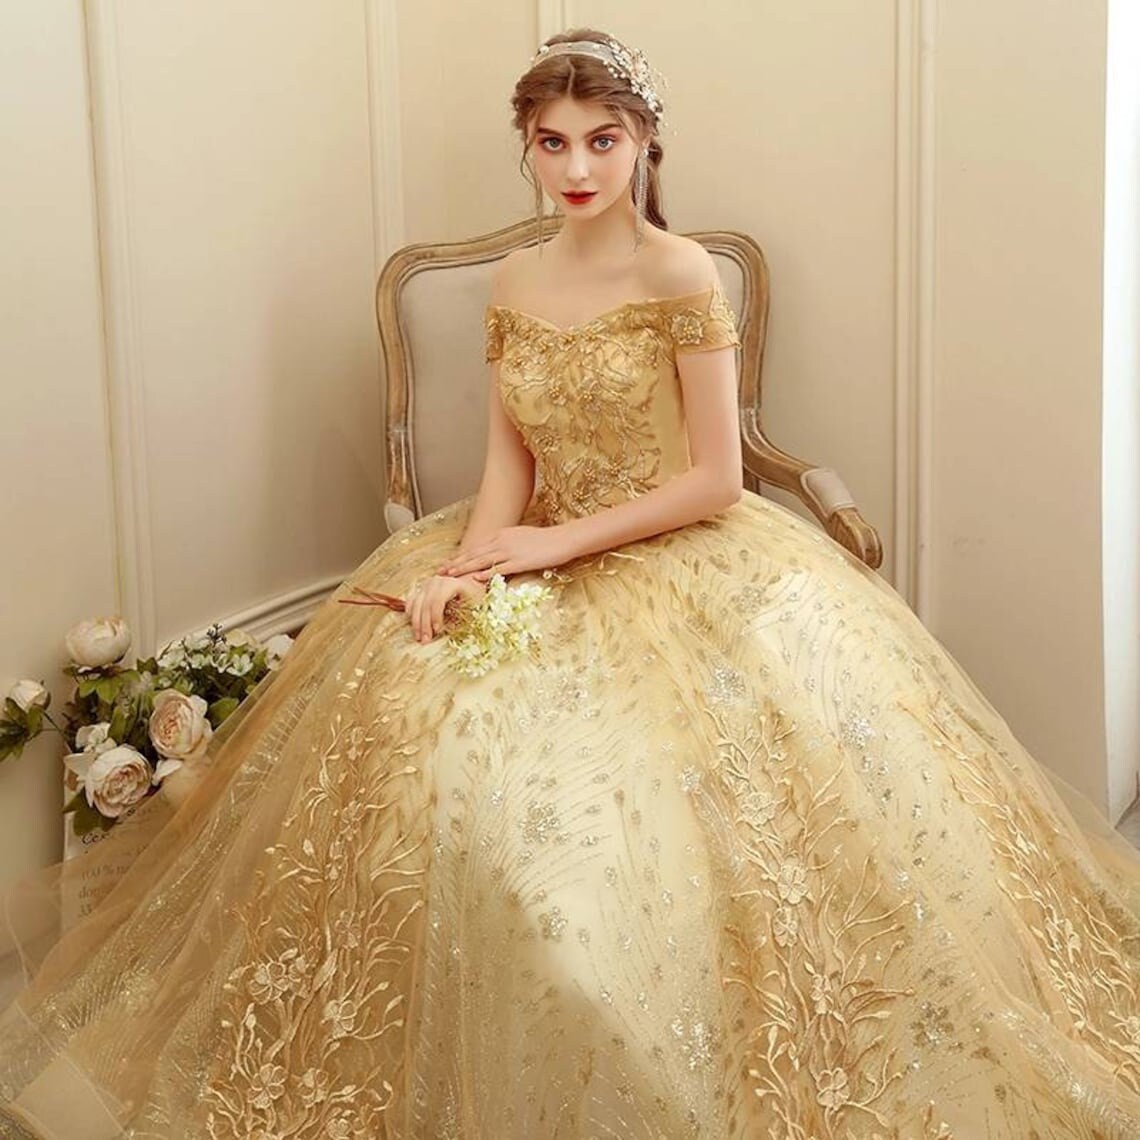 Prom Dress Beauty Ball Gown Dress Prom Dress Gold Prom - Etsy